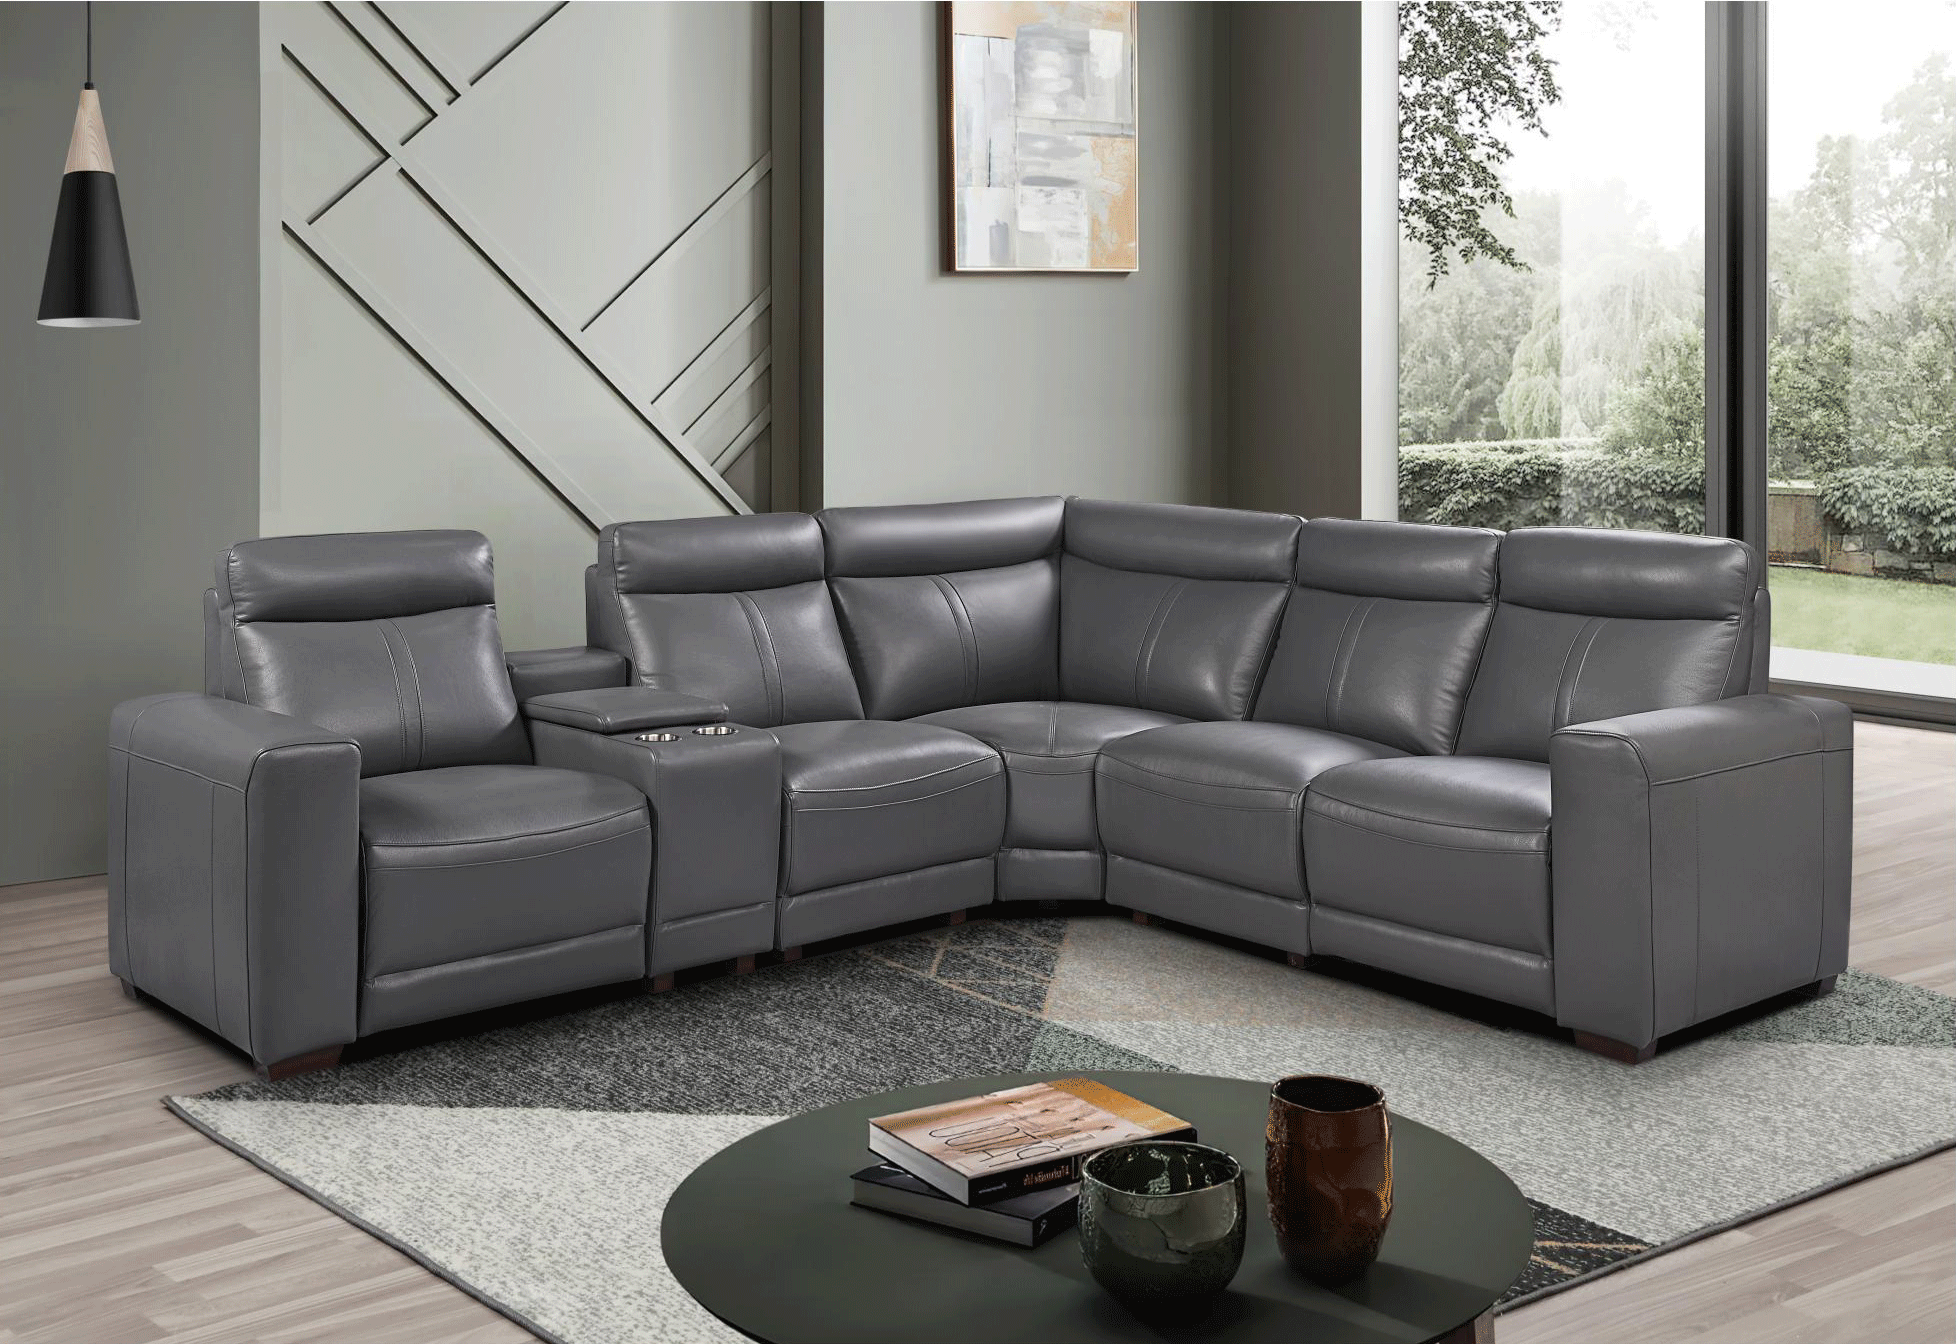 Living Room Furniture Sofas Loveseats and Chairs 2777 Sectional w/ recliners